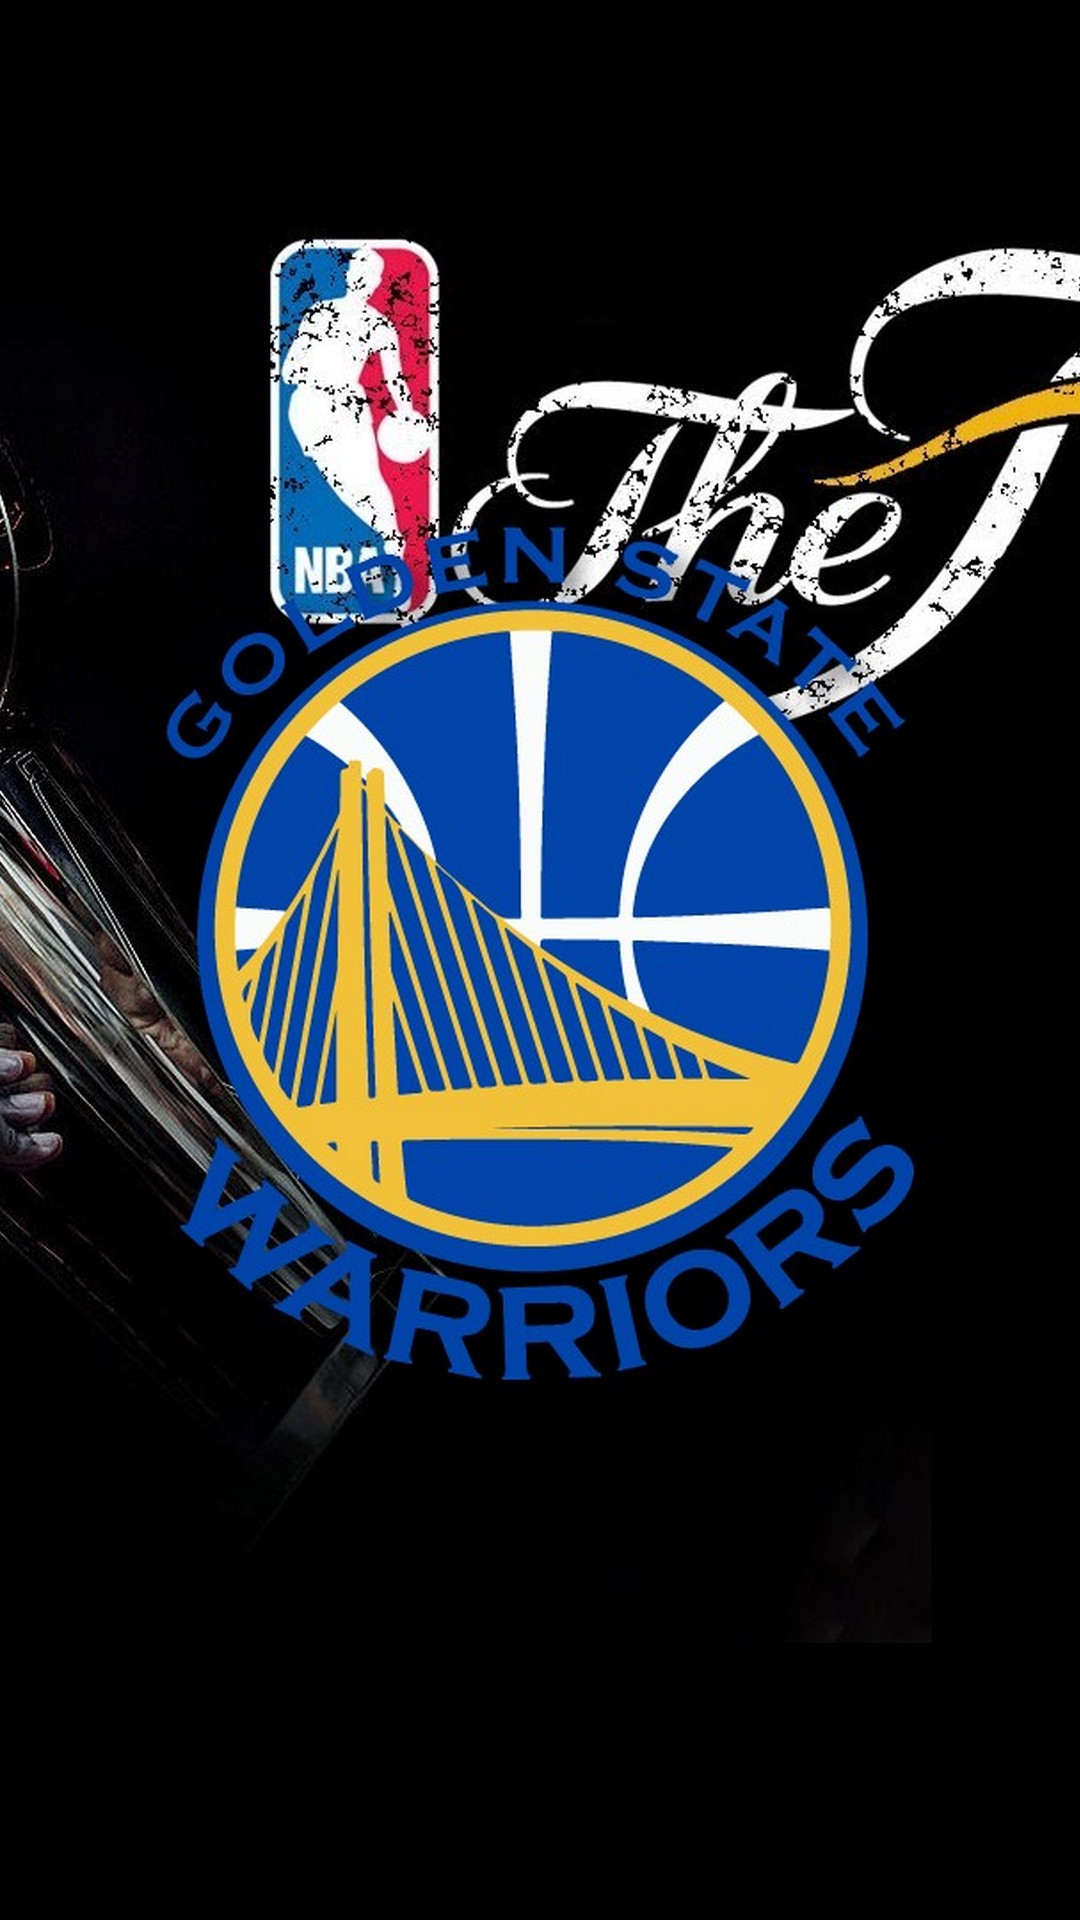 Golden State Warriors HD Wallpapers For Mobile With Resolution 1080X1920 pixel. You can make this wallpaper for your Desktop Computer Backgrounds, Mac Wallpapers, Android Lock screen or iPhone Screensavers